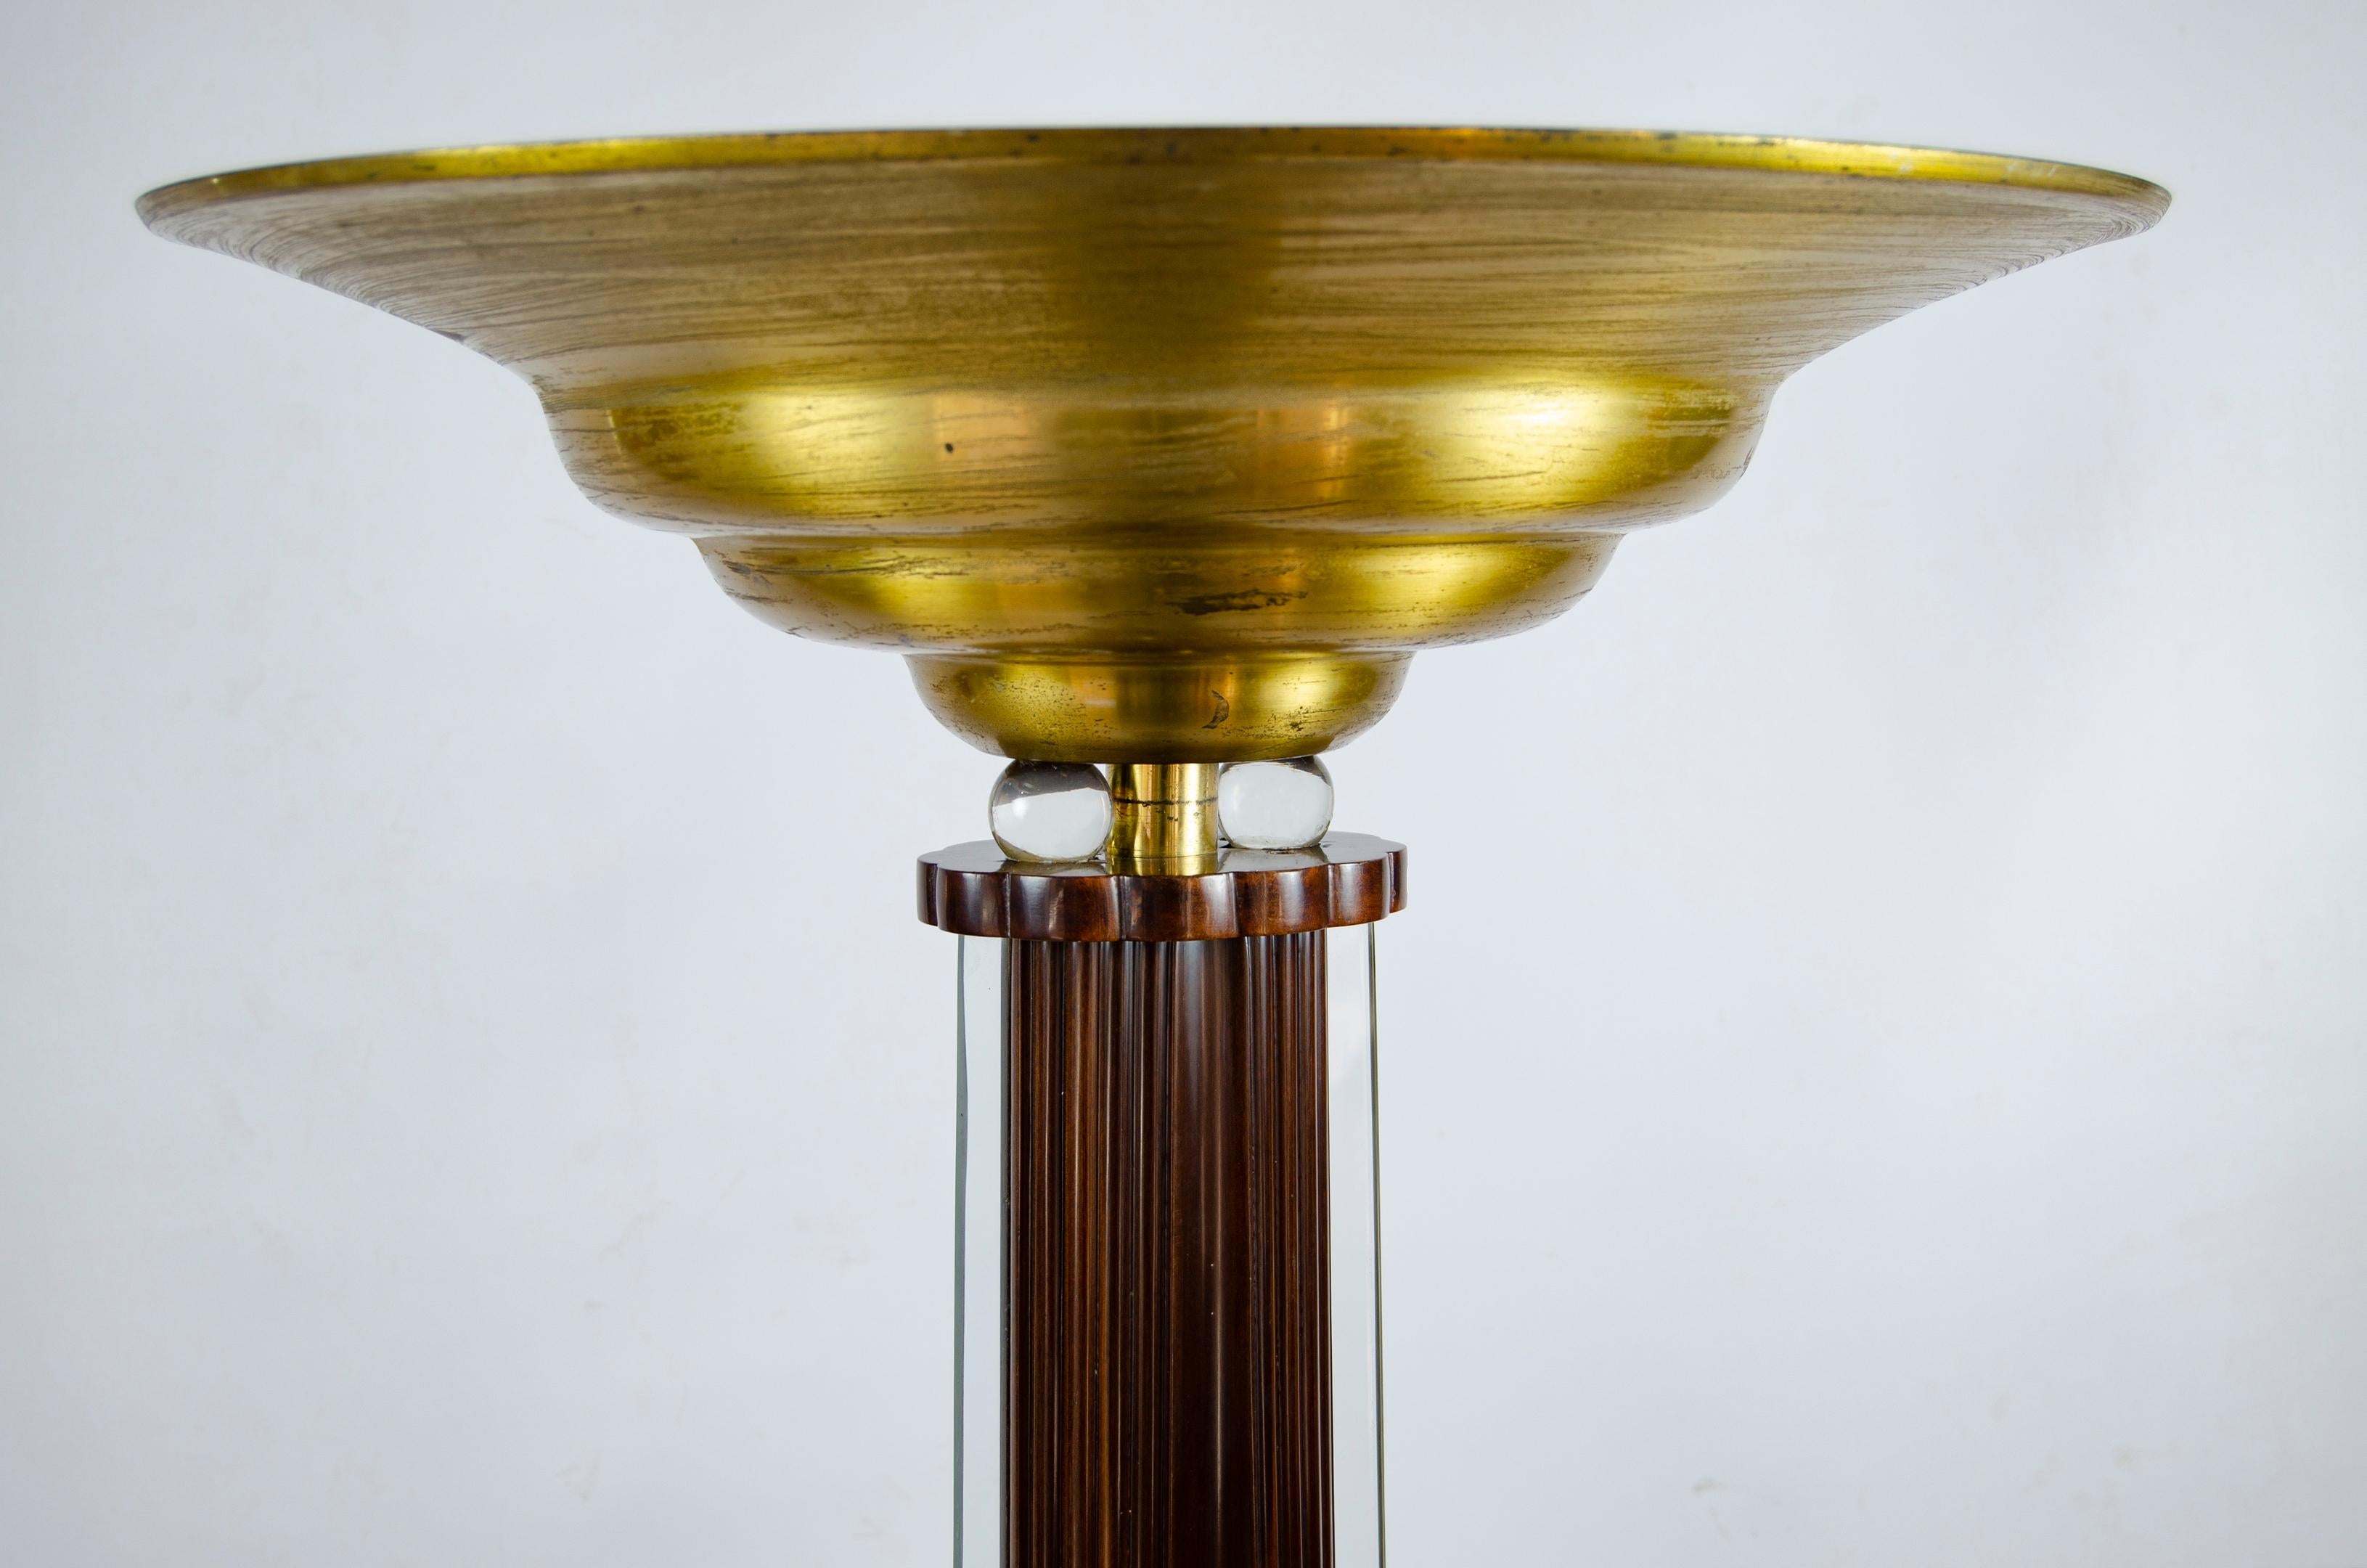 Art Deco floor lamp
Materials: wood, bronze, glass and marble
Side windows light up
the base is marble
electrified 220 w
original gold with some natural wear
Circa 1930 Origin France.